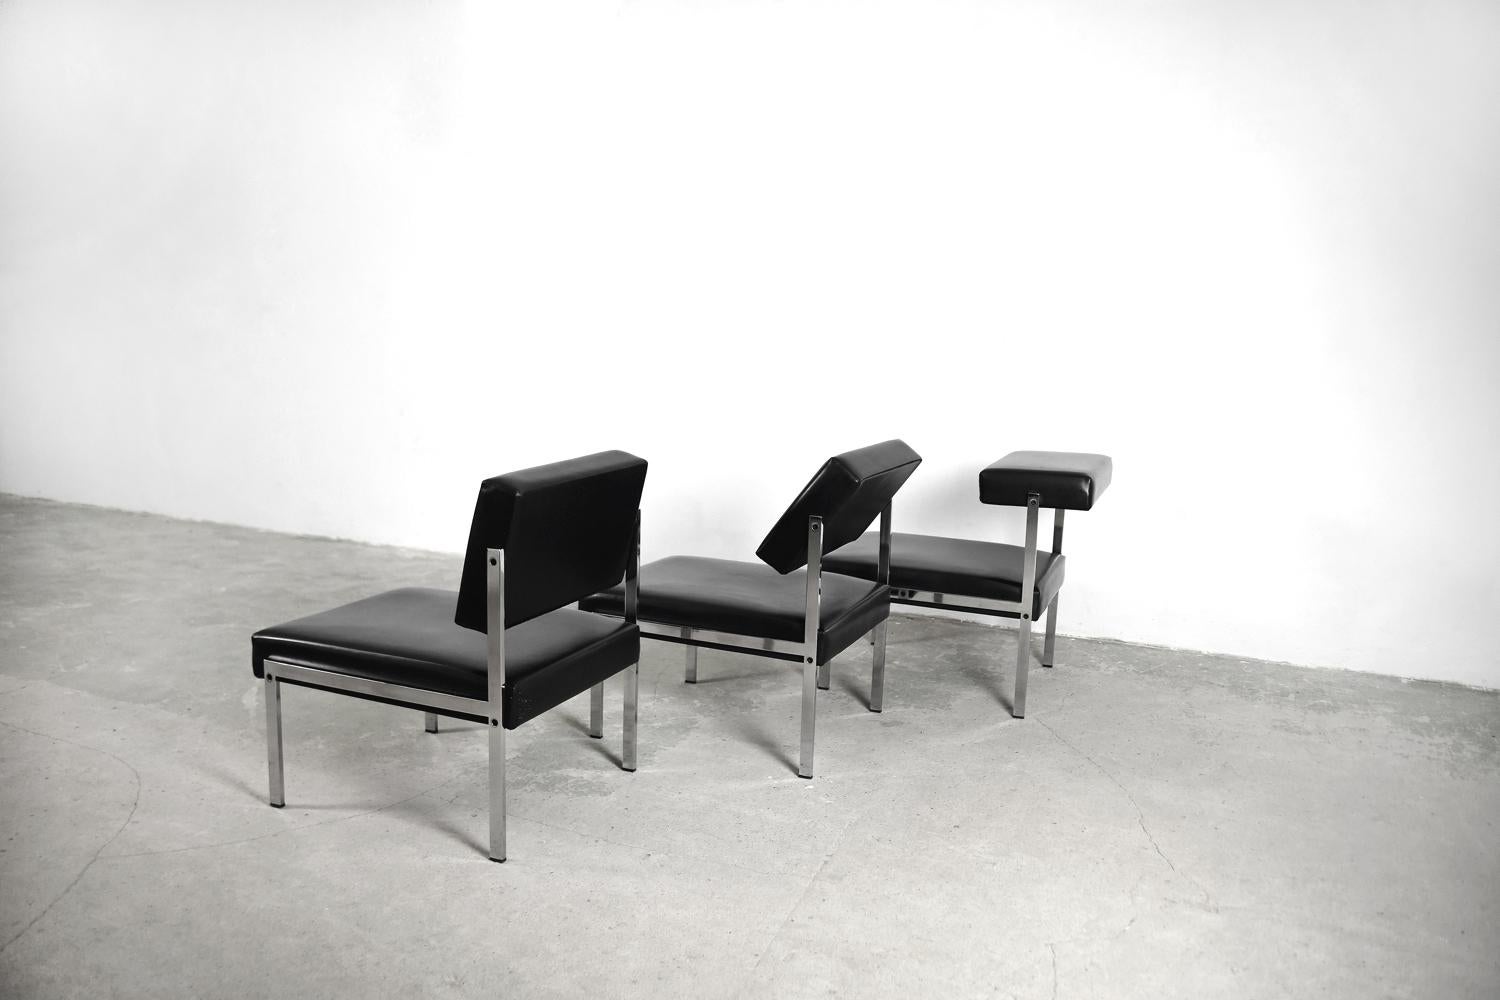 Minimalist German Chrome and Leather Modular Lounge Chairs from Brune, 1960s For Sale 2